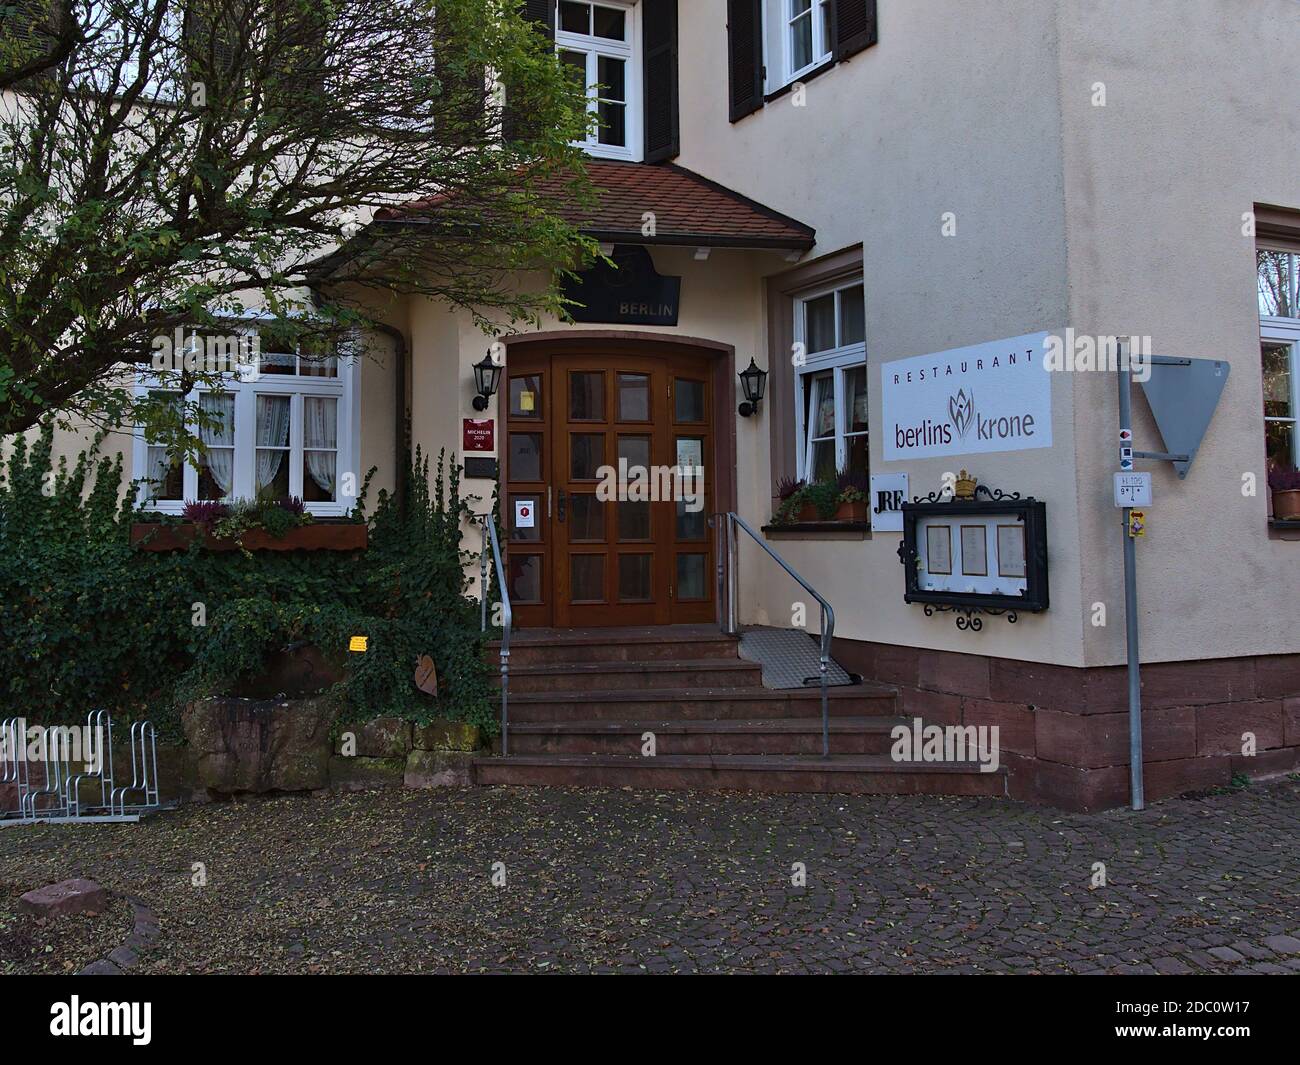 Bad Teinach-Zavelstein,Germany - 11/14/2020: Front view of the entrance of gourmet restaurant Berlins Krone, listed in Guide Michelin 2020 (one star). Stock Photo